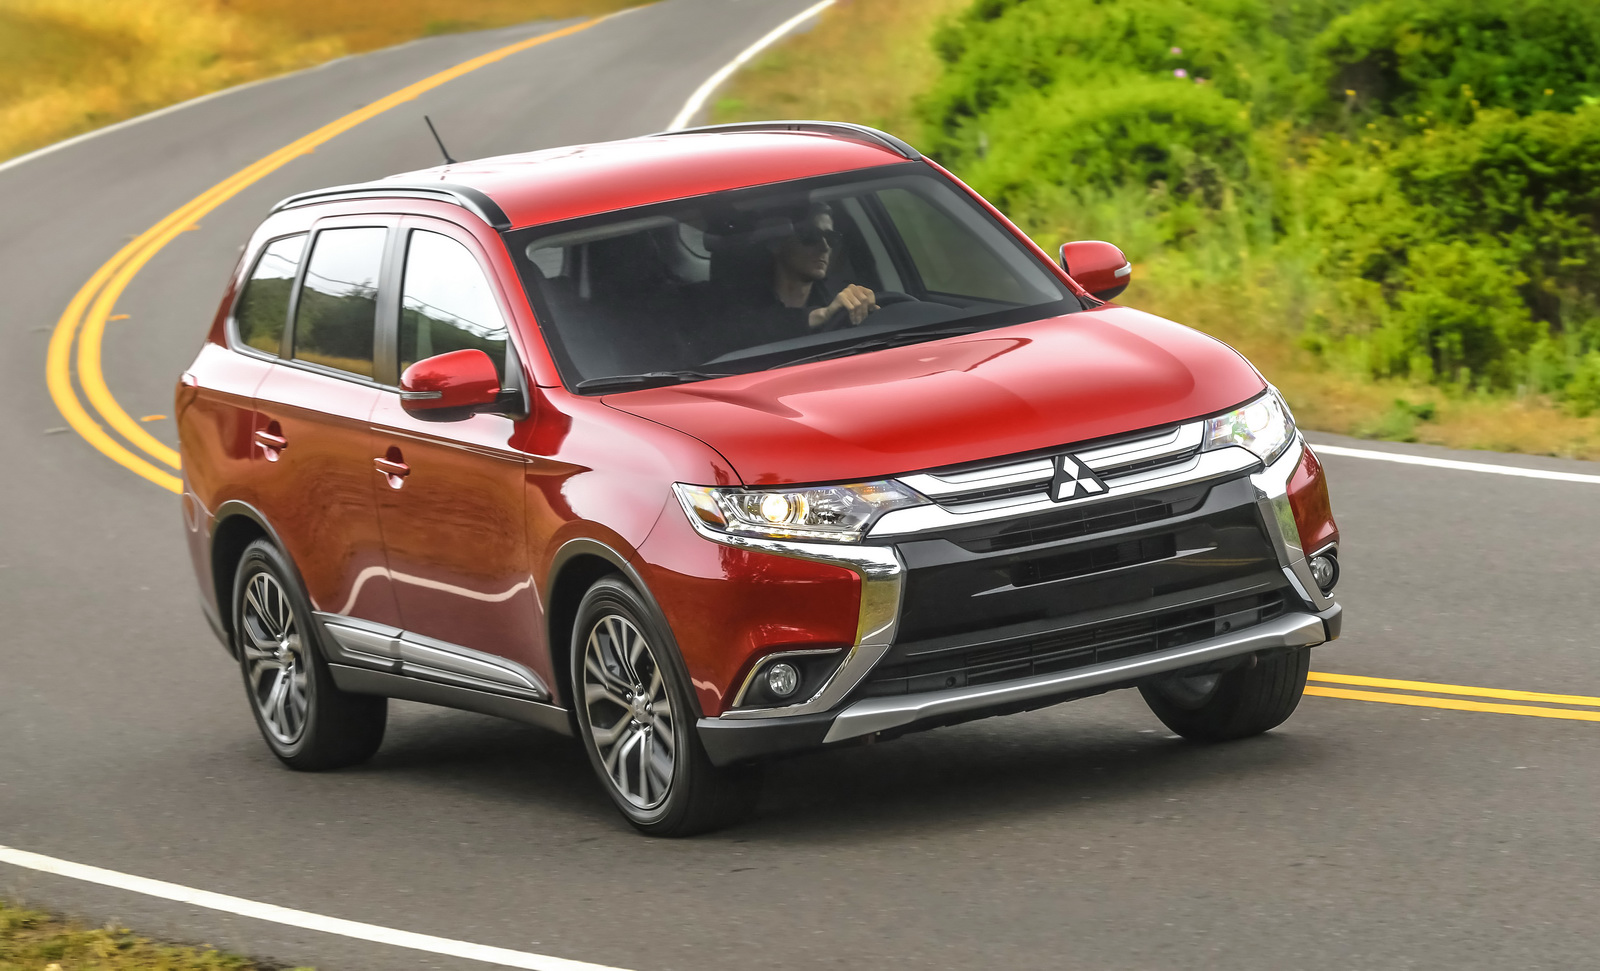 2016 Mitsubishi Outlander Priced From $22,995*, $200 Less Than 2015 ...